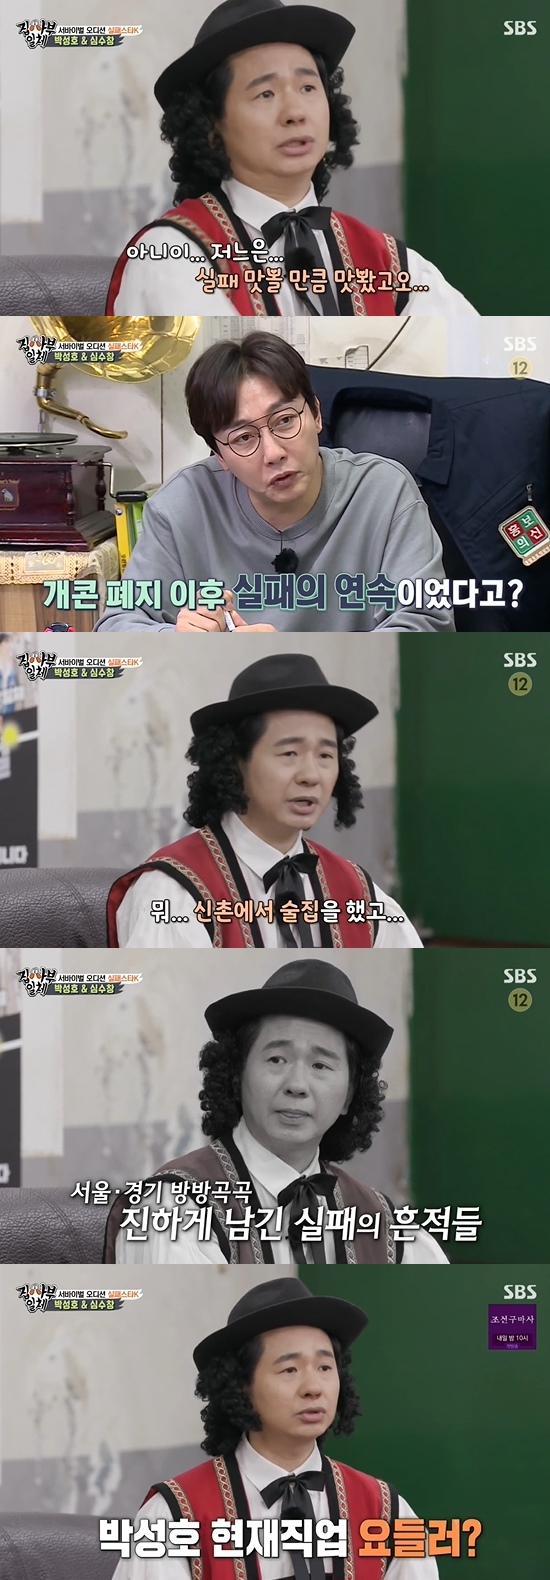 All The Butlers Dr Cheng reveals he has failed to start a business after Gag Concert abolationOn SBS All The Butlers broadcasted on the 21st, Dr. Cheng and Shim Soo Chang appeared at Failure Star K audition hall.Lee Seung-gi said, I have a lot of buzzwords when I saw Dr. Cheng who appeared in Failure Star K audition hall.Why are you here? Jung Eun-woo also said, I saw a lot of Gag Concert when I was a child. Dr. Cheng said, As soon as Mr. Jung Eun-woo saw me, he laughed a lot.Dr. Cheng said, I shook the Republic of Korea. I tasted Failure enough to taste it, and there is no place to retreat.Dr. Cheng confessed that he had Top Model in various fields since Gag Concert abolation, but Failure.Failure is basic, I did bars, event shops, etc., Dr. Cheng said, adding that he is currently working as a yodler.Dr. Cheng practiced two hours a day for a year. His goal was to advance to Switzerland and Europe, and Corona 19 broke out. Photo = SBS Broadcasting Screen